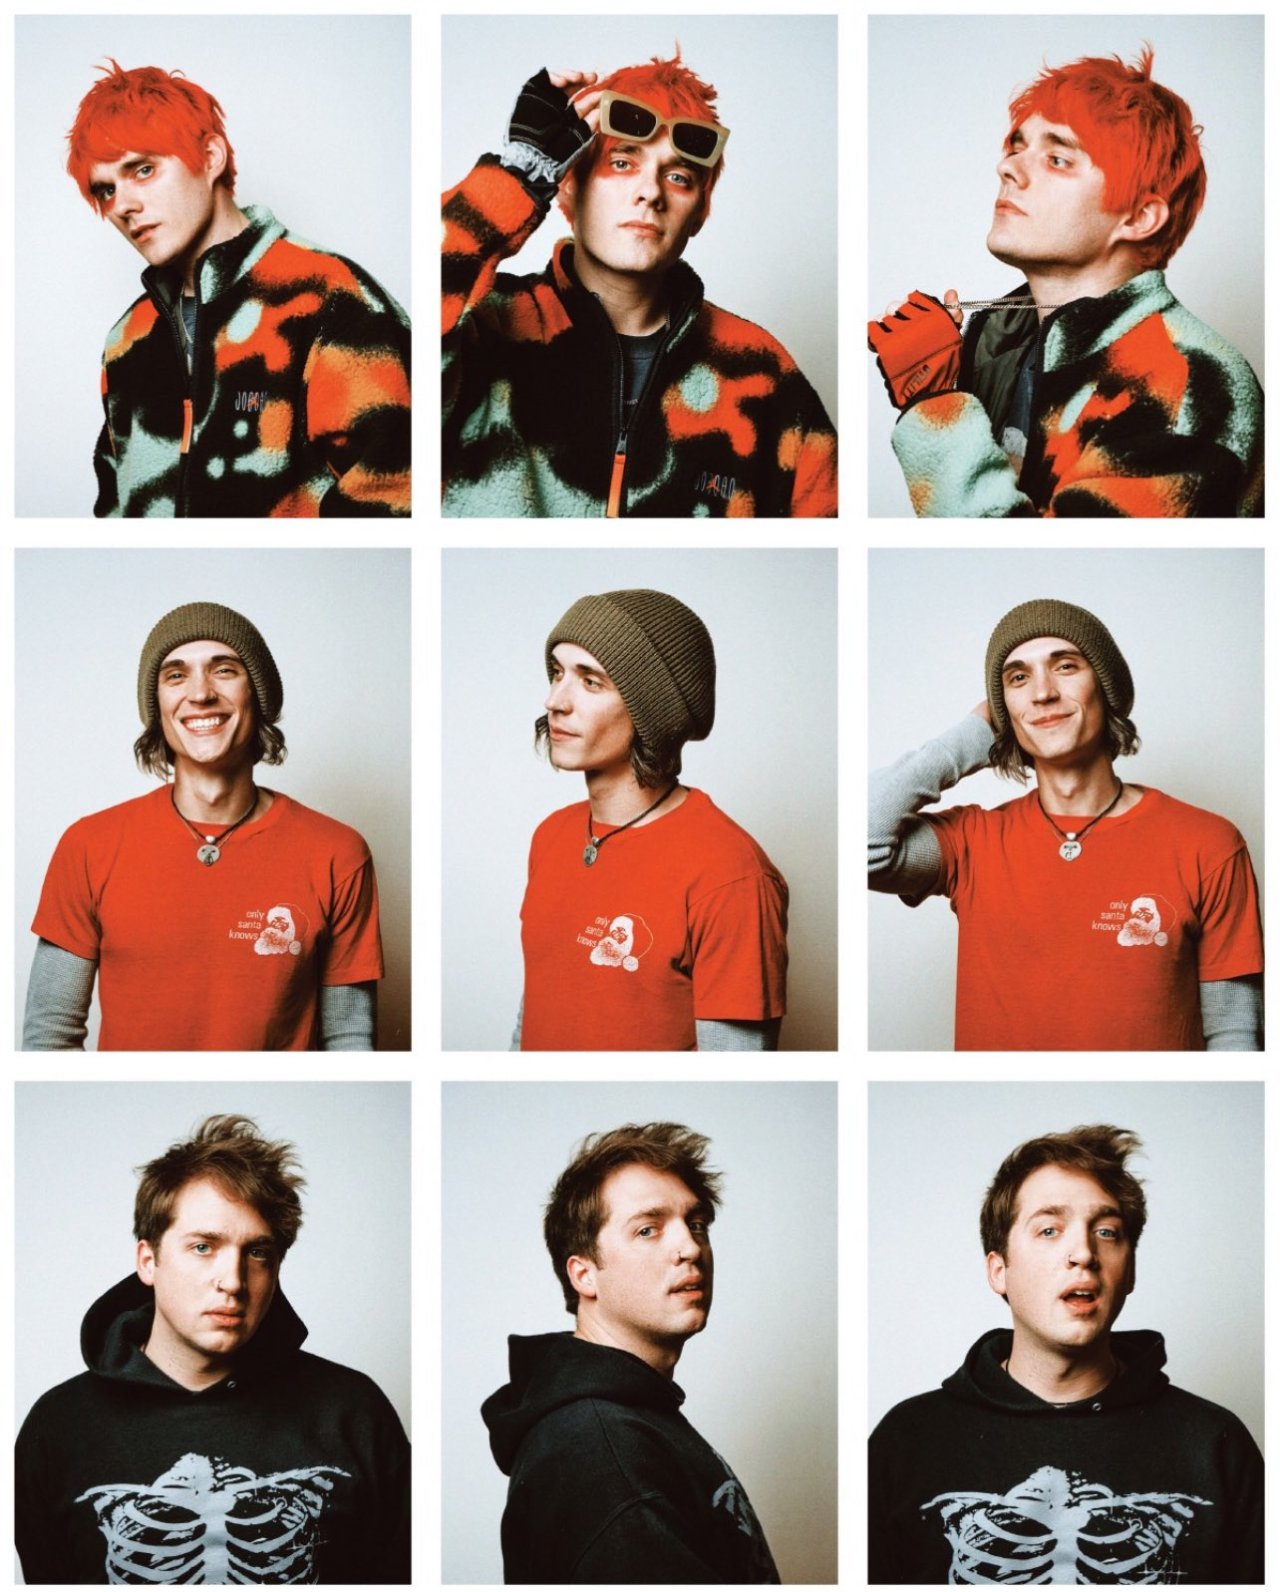 Three portraits of all 3 members of waterparks in a grid